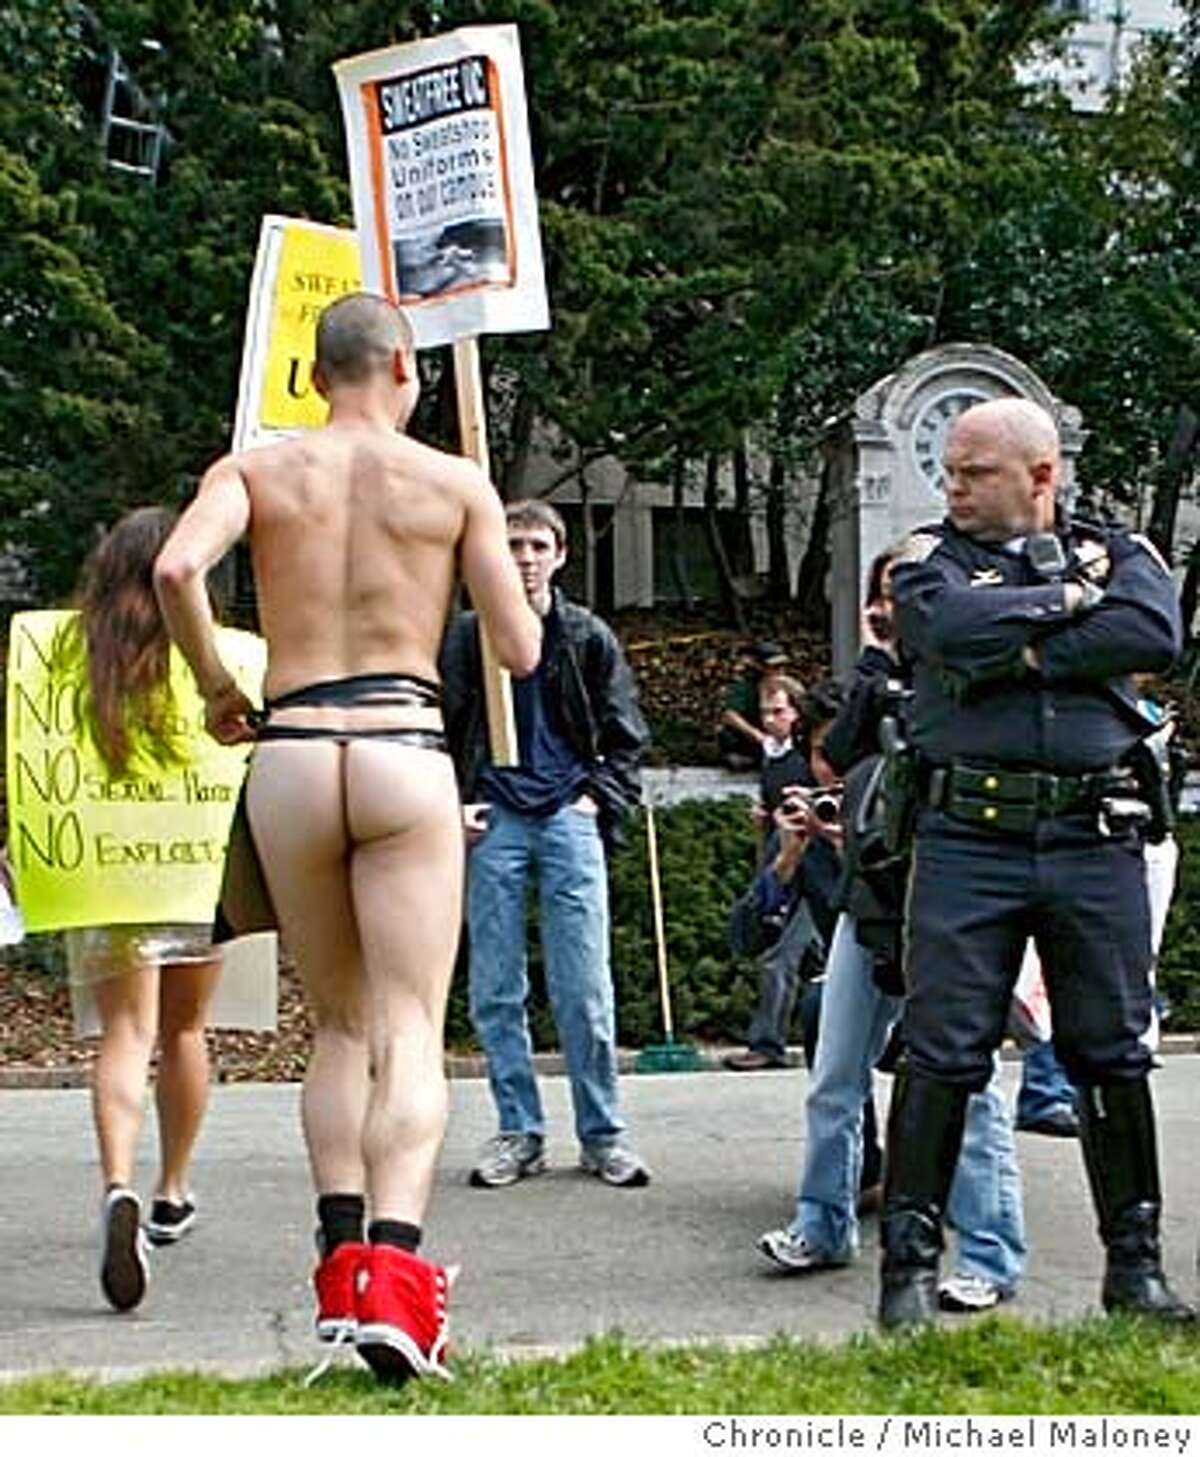 A University of California Police Department Officer, J. Sprecher, watches as some of the protesters circulated among the gawkers. UC Berkeley students in various forms of dress and undress demonstrated outside UCB Chancellor Robert Birgeneau's office at noon today. About 50 students protested UCBerkeley earning royalties from collegiate apparel companies without guaranteeing these companies' fair labor practices. Photo by Michael Maloney / San Francisco Chronicle on 3/1/06 in Berkeley,CA